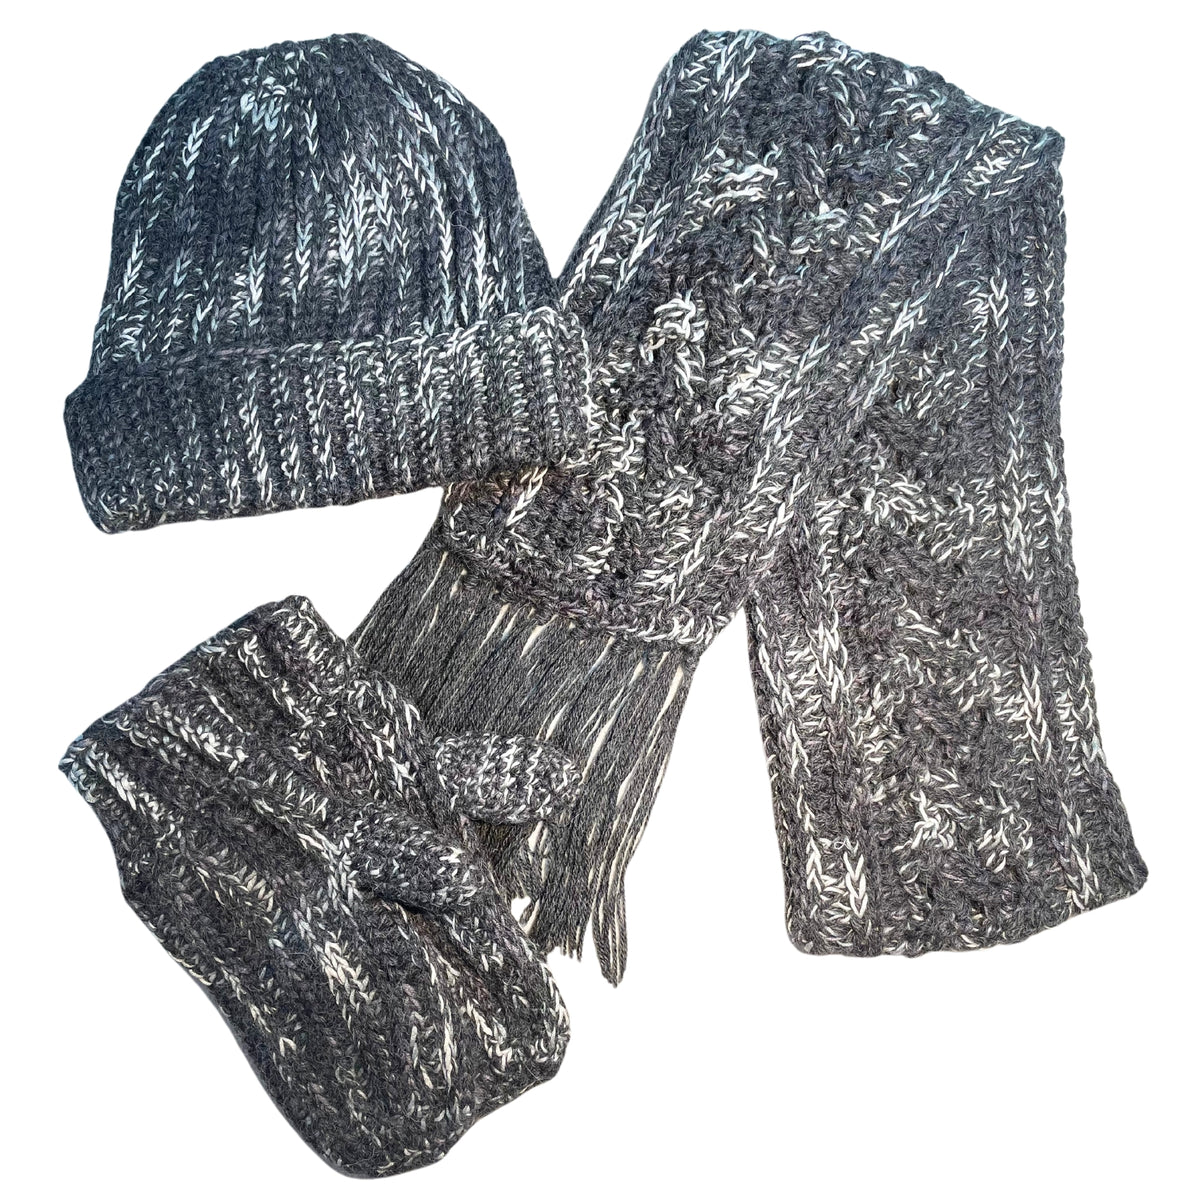 Cozy soft warm alpaca and bamboo matching set of ridge ribbed hat, scarf with long tassels, and ridge ribbed mittens for winter fashion. Handmade knitted crochet items made from yarn in the colors black, charcoal, dark gray, light gray, and white.